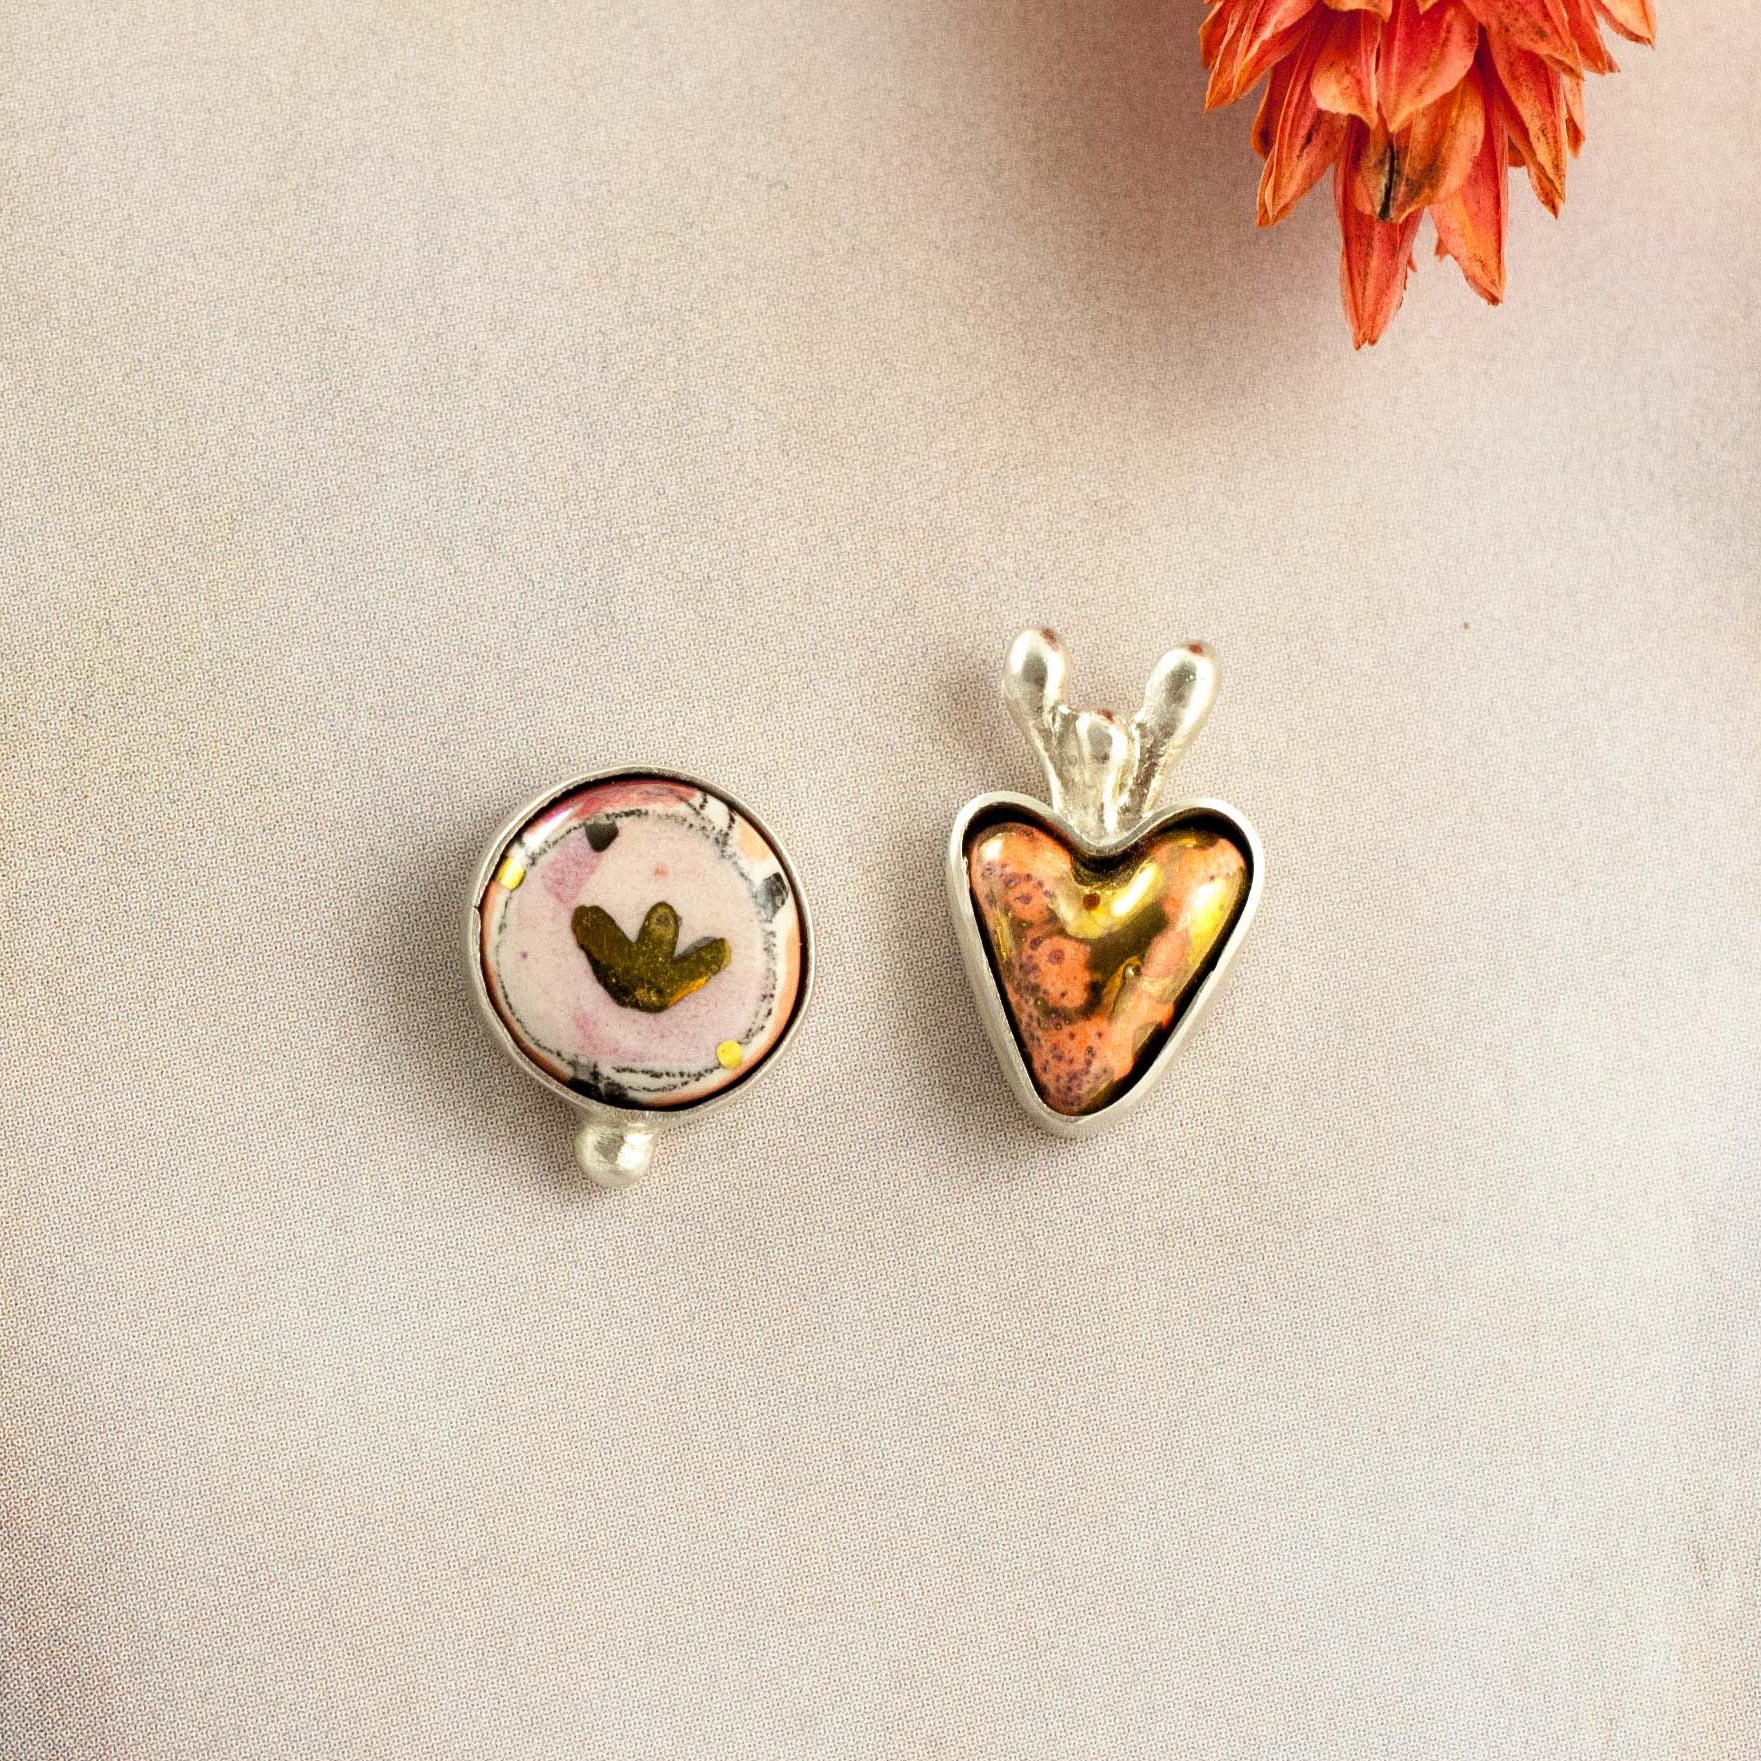 Gold and pink color silver earrings in shape of a heart